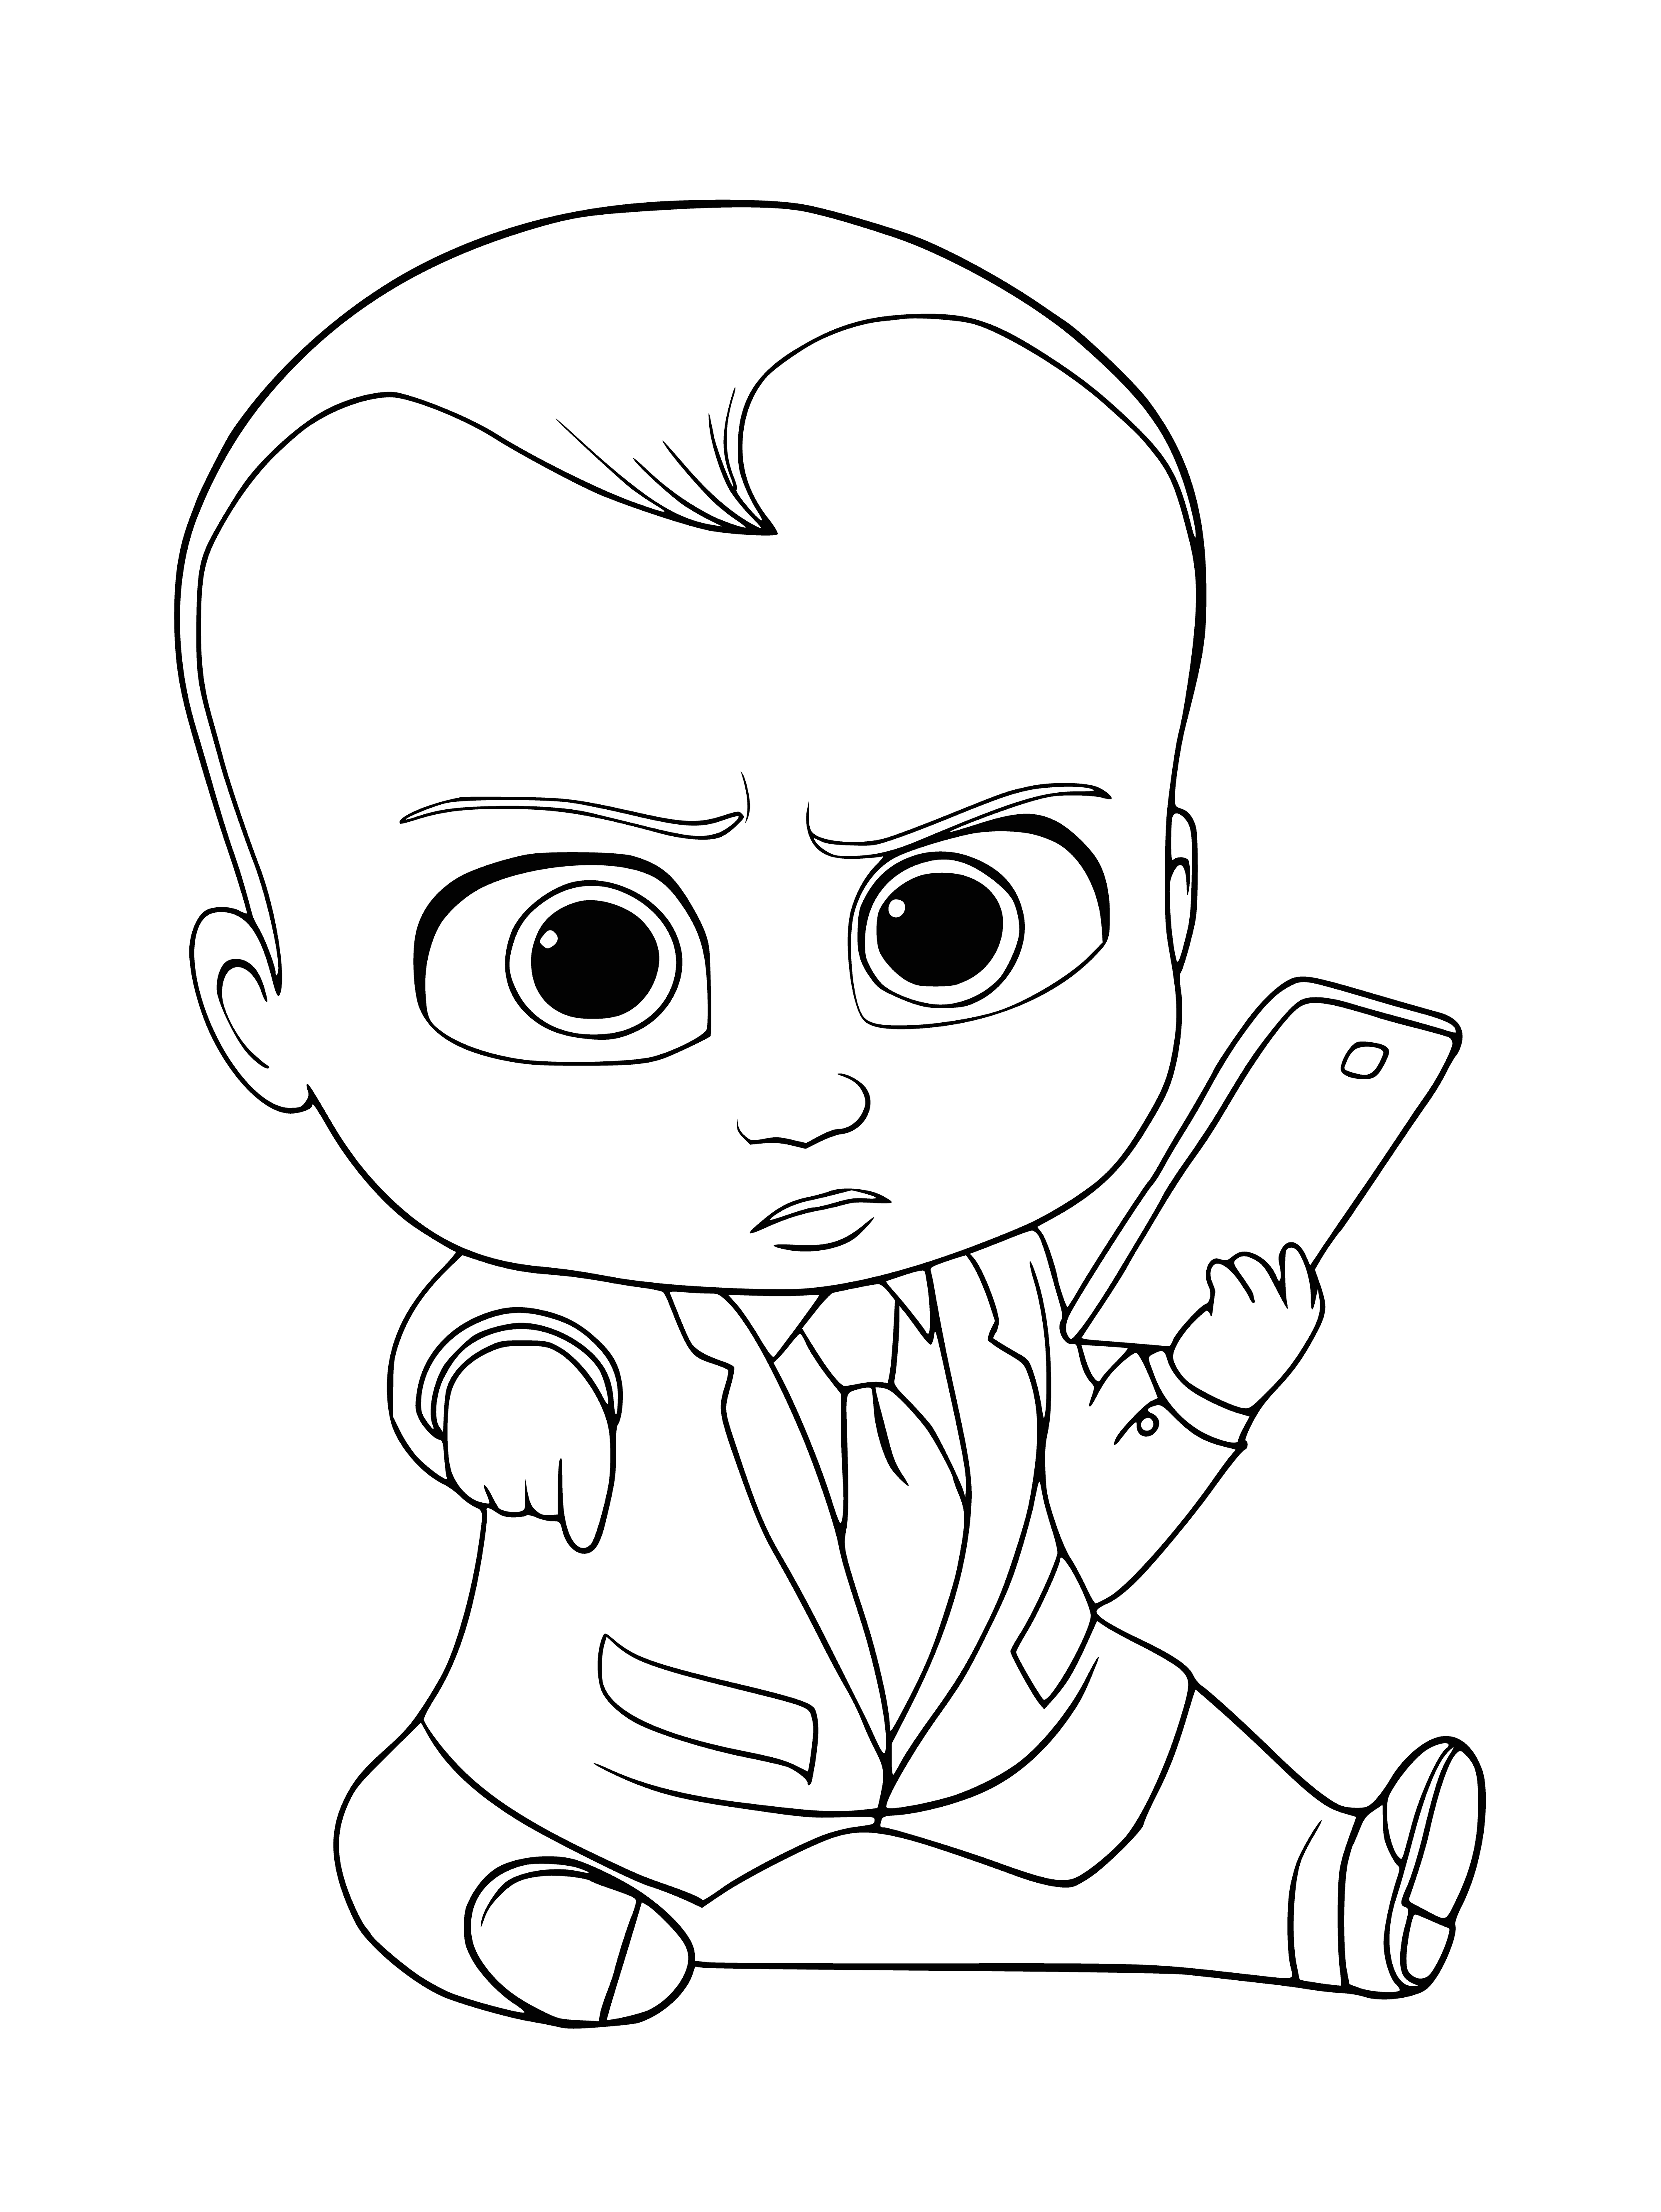 coloring page: Baby boy is boss, holding cell phone like he's in charge. #ColoringPage